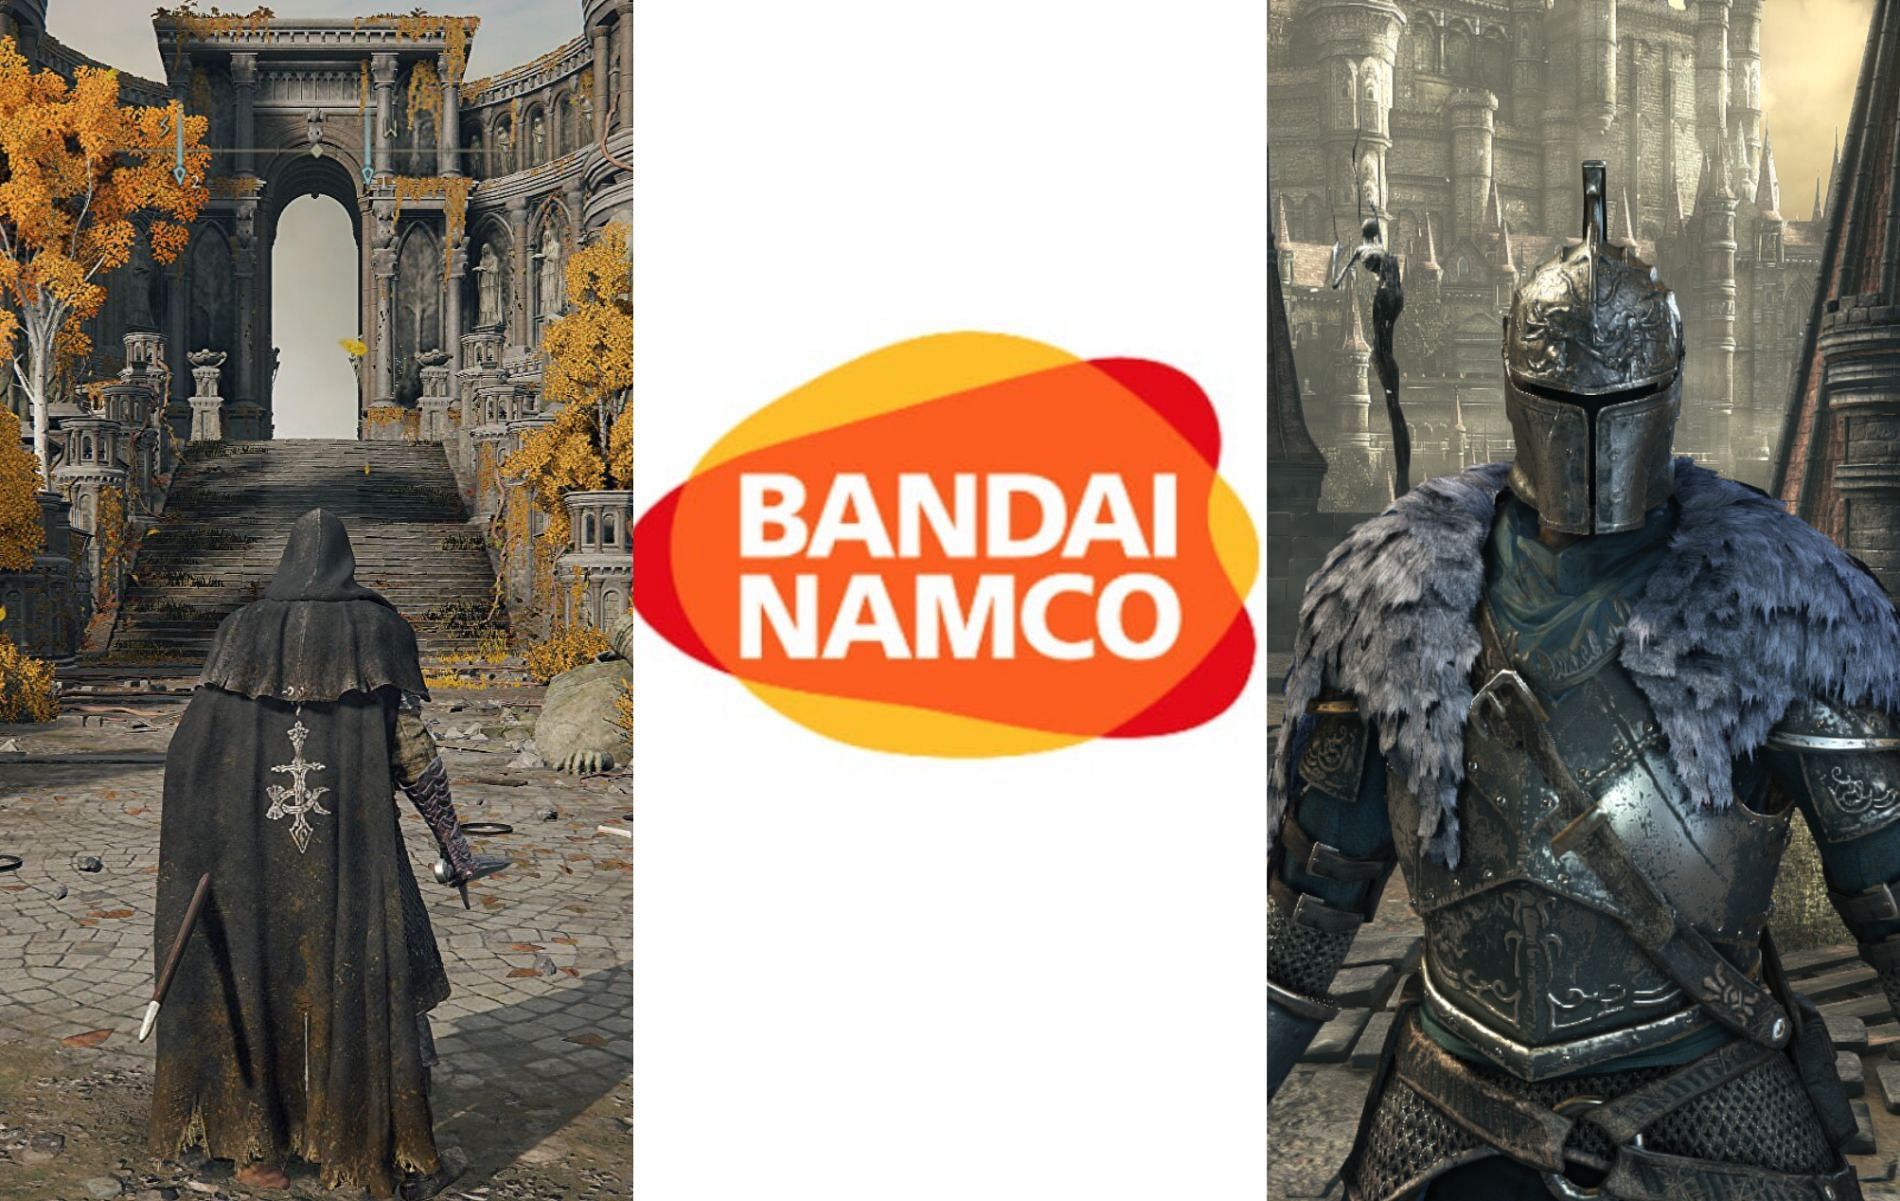 Elden Ring publishers may have been targeted by a ransomware attack (Images via Elden Ring, Bandai Namco, and Dark Souls 3)